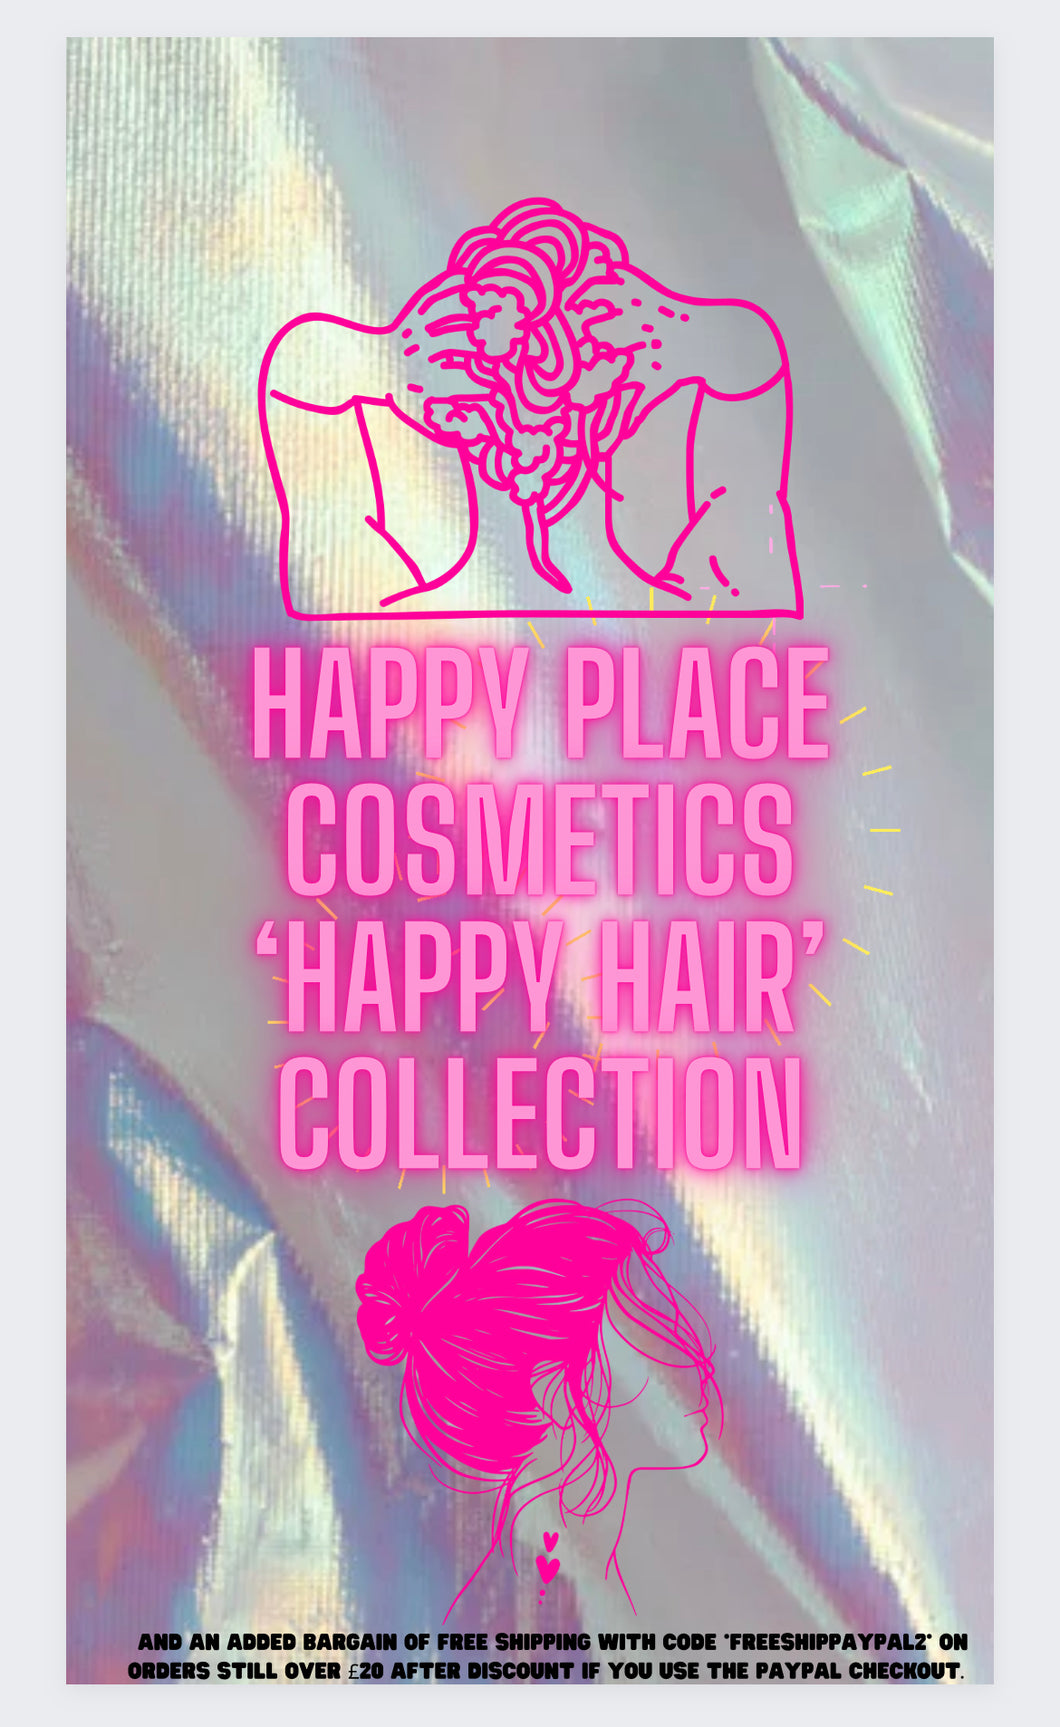 Happy Place Cosmetics Happy Hair Collection.